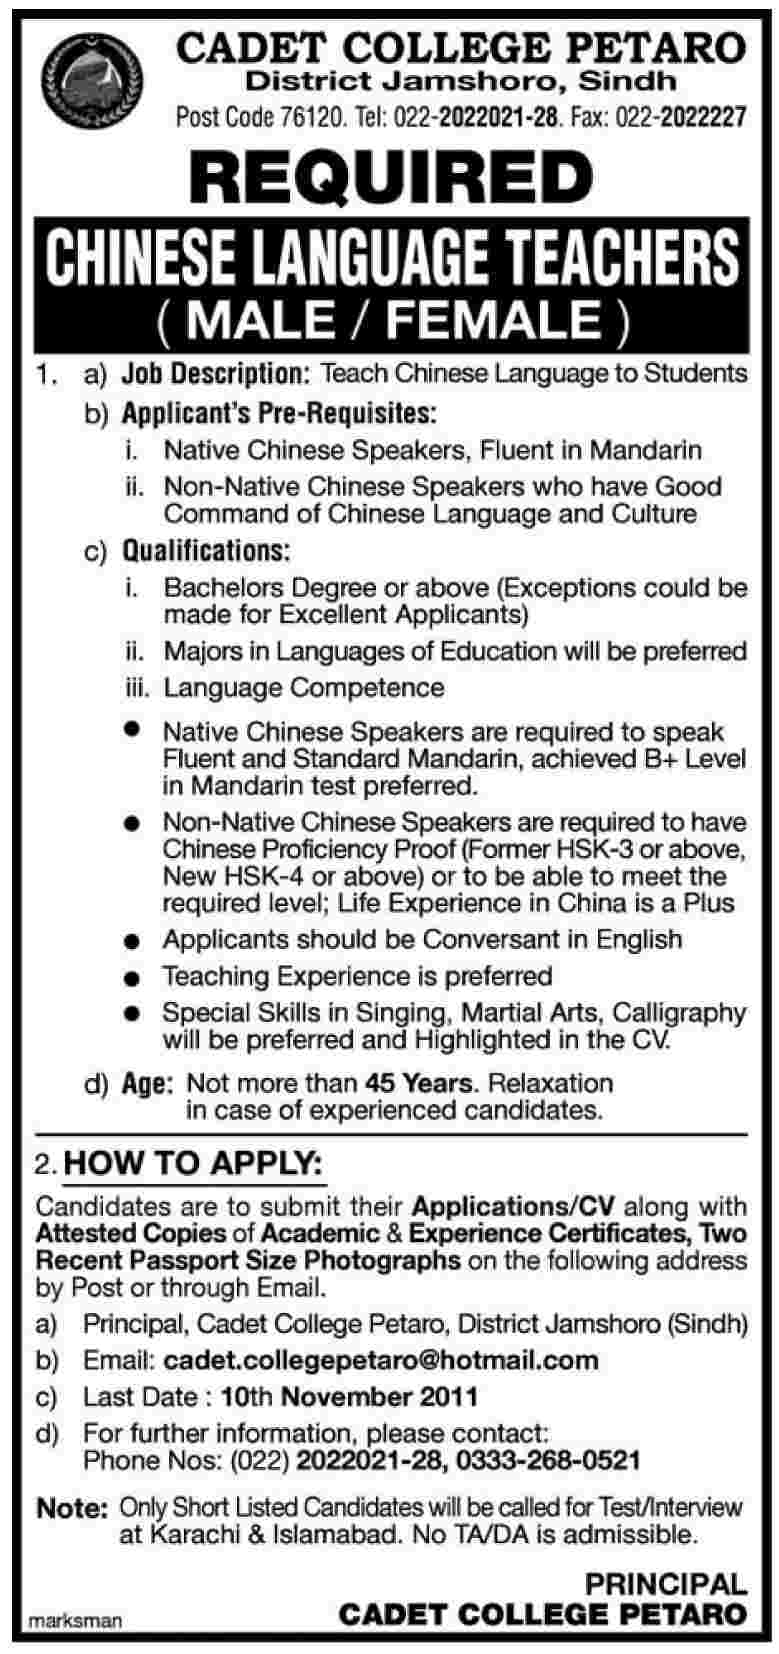 Chinese Language Teachers Required by Cadet College Petaro, District Jamshoro